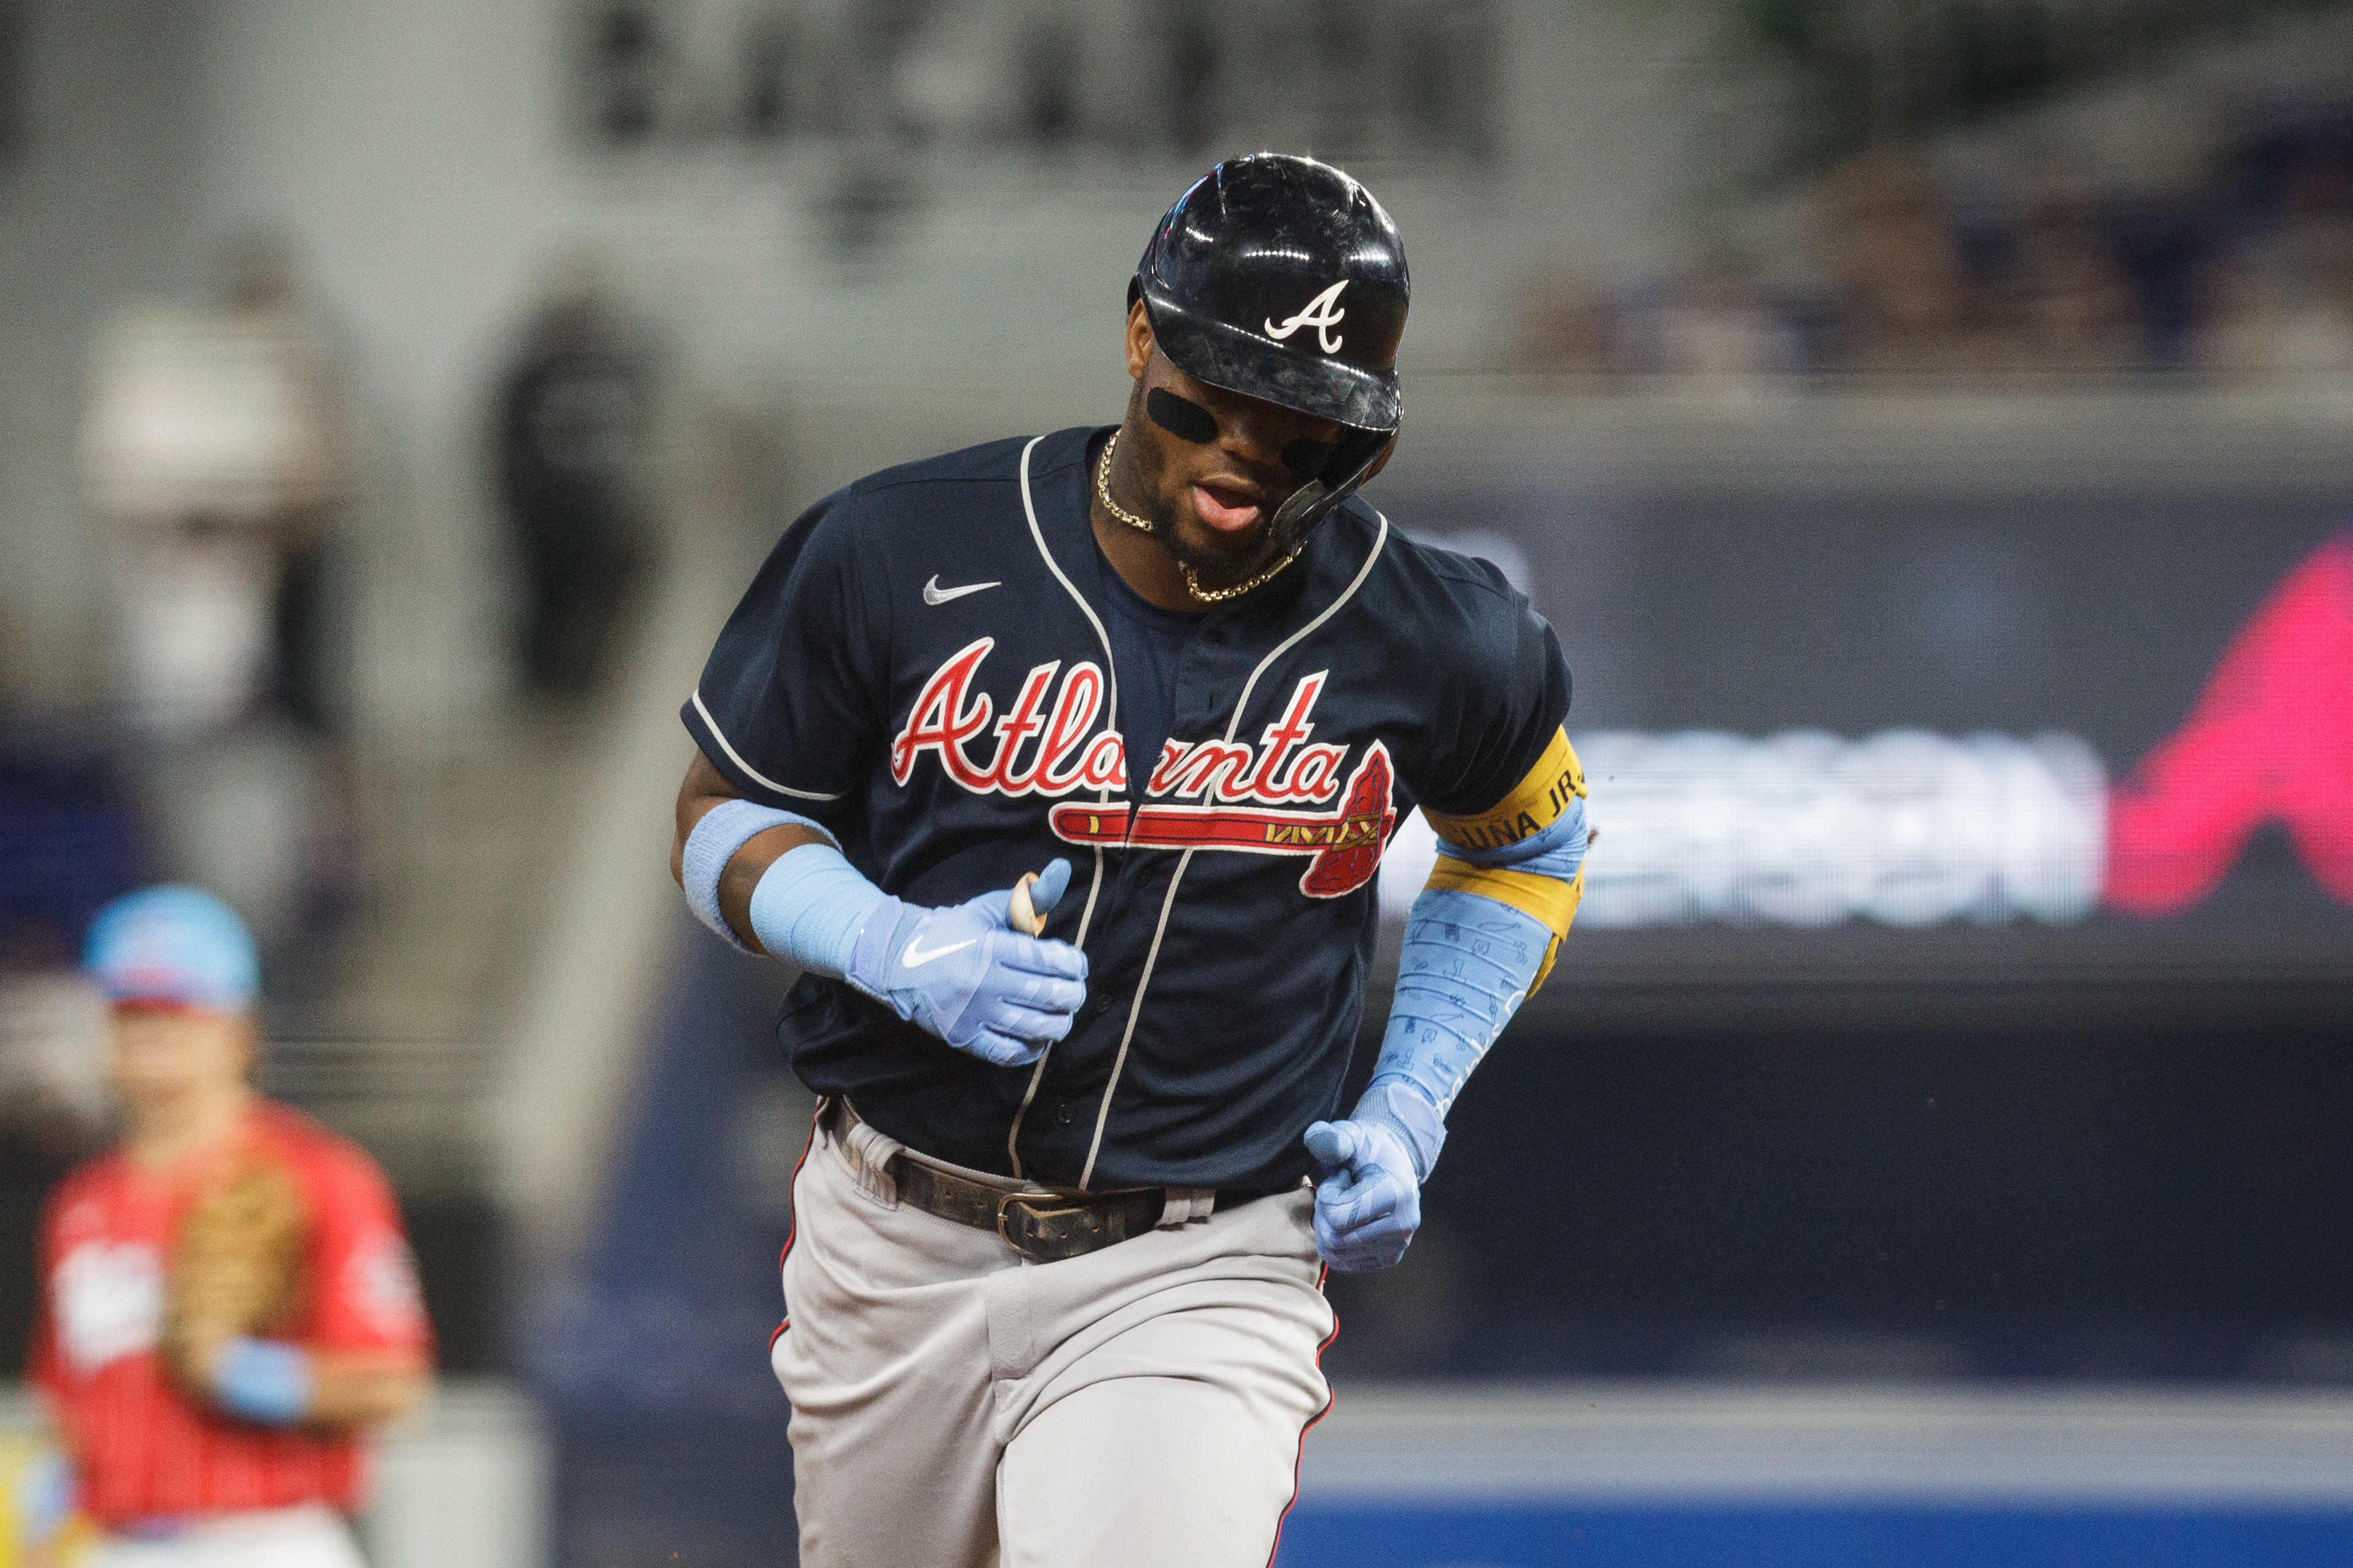 Ronald Acuña Jr. #13 of the Atlanta Braves rounds the bases after hitting a home run during the 1st inning against the Miami Marlins at loanDepot park on August 13, 2022 in Miami, Florida.